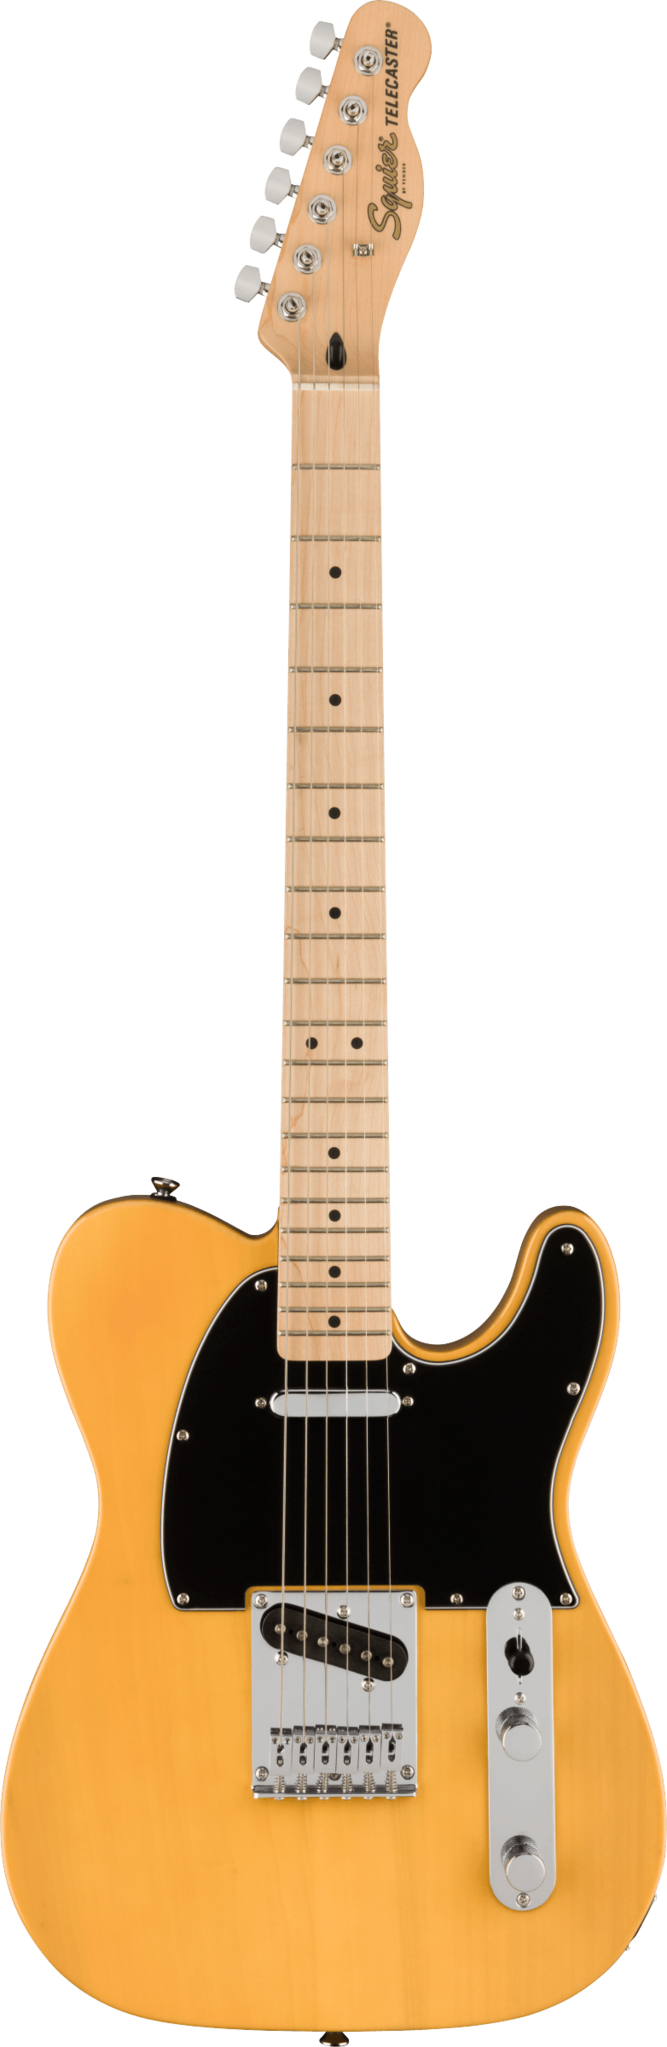 Fender Squier Affinity Series Telecaster - Butterscotch - North